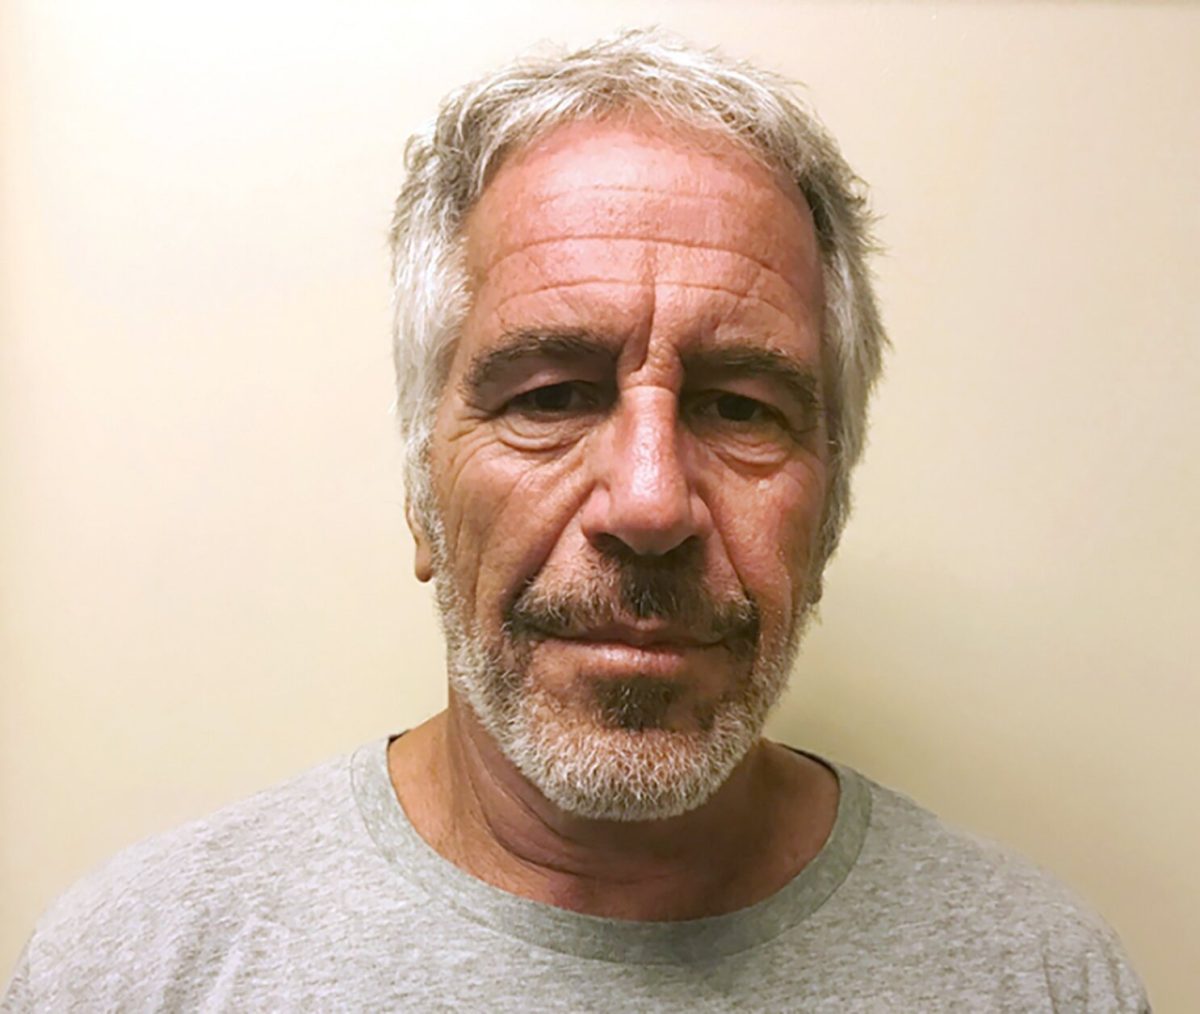 A+2017+photo+of+Epstein+provided+by+the+New+York+State+Sex+Offender+Registry.